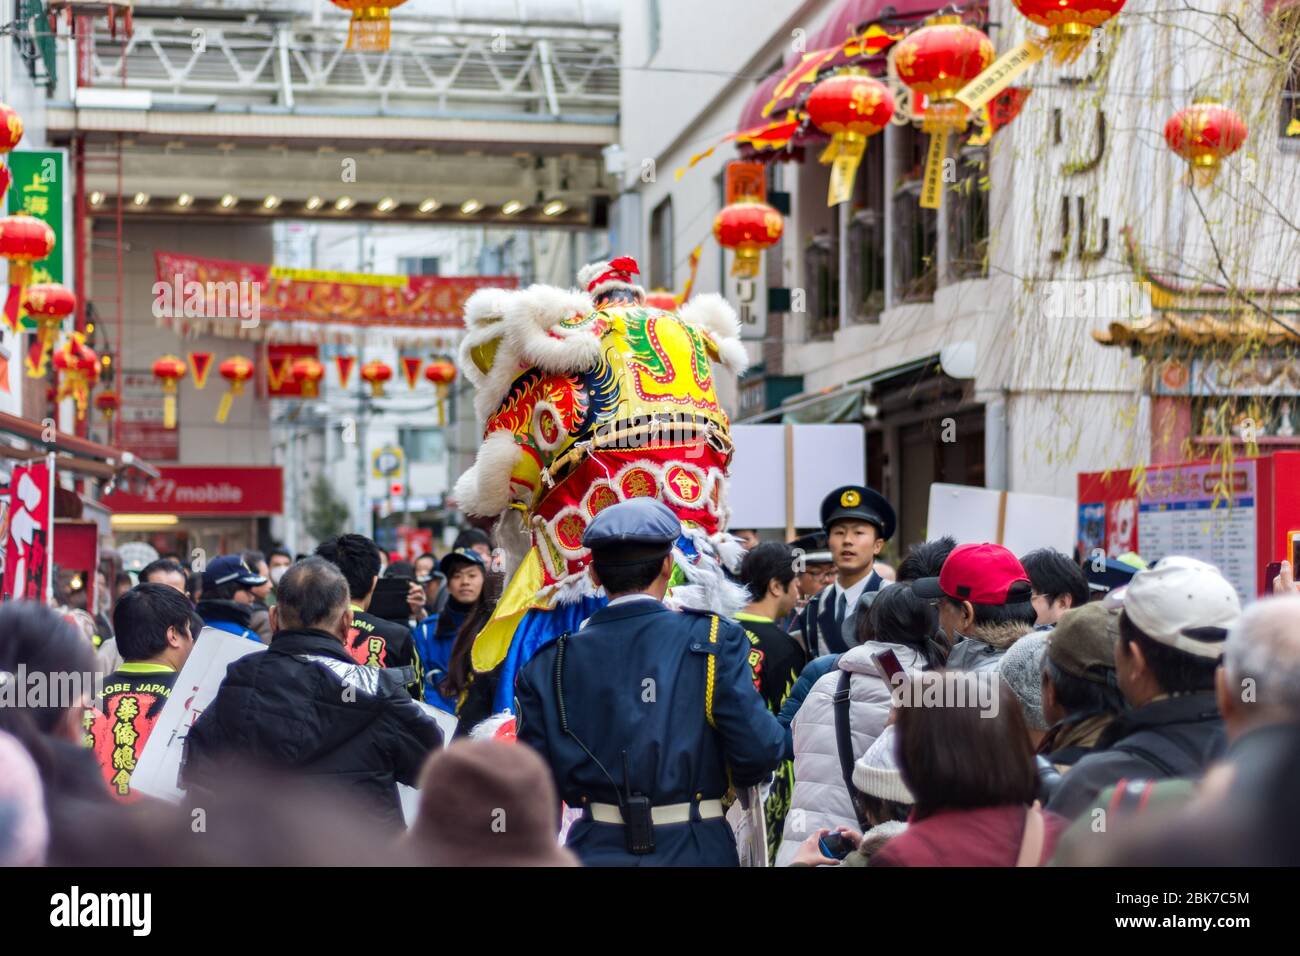 Kobe / Japan - February 17, 2018: Traditional Dragon dance during Lunar New Year celebration in Chinatown in Kobe, Hyogo prefecture, Japan Stock Photo